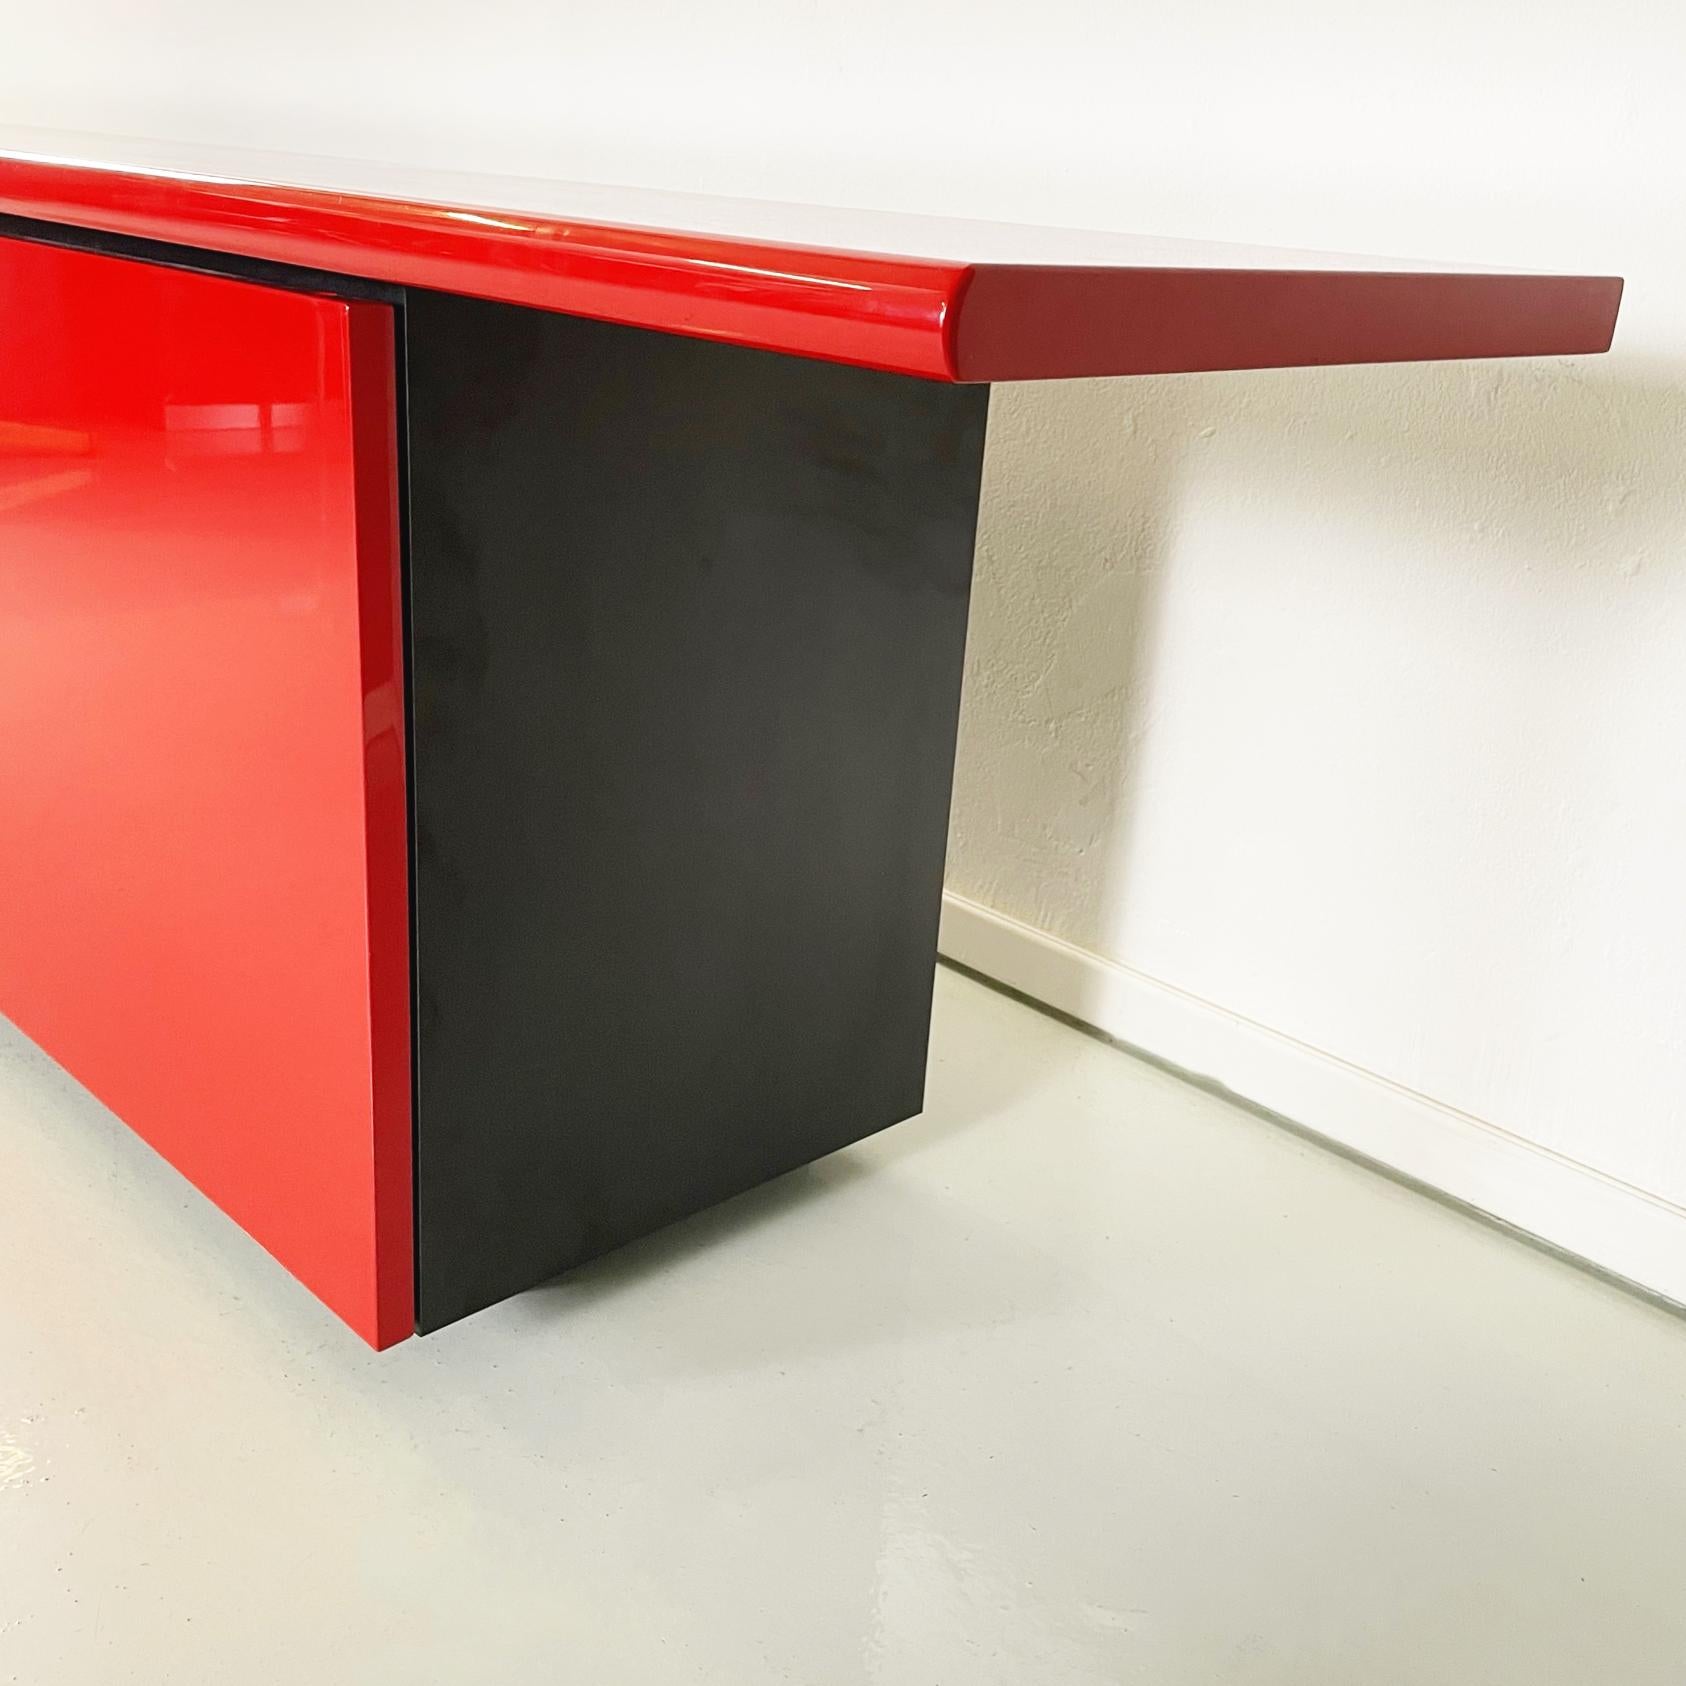 Italian Modern Red Sideboard Sheraton by Stoppino and Acerbis for Acerbis, 1977 For Sale 3